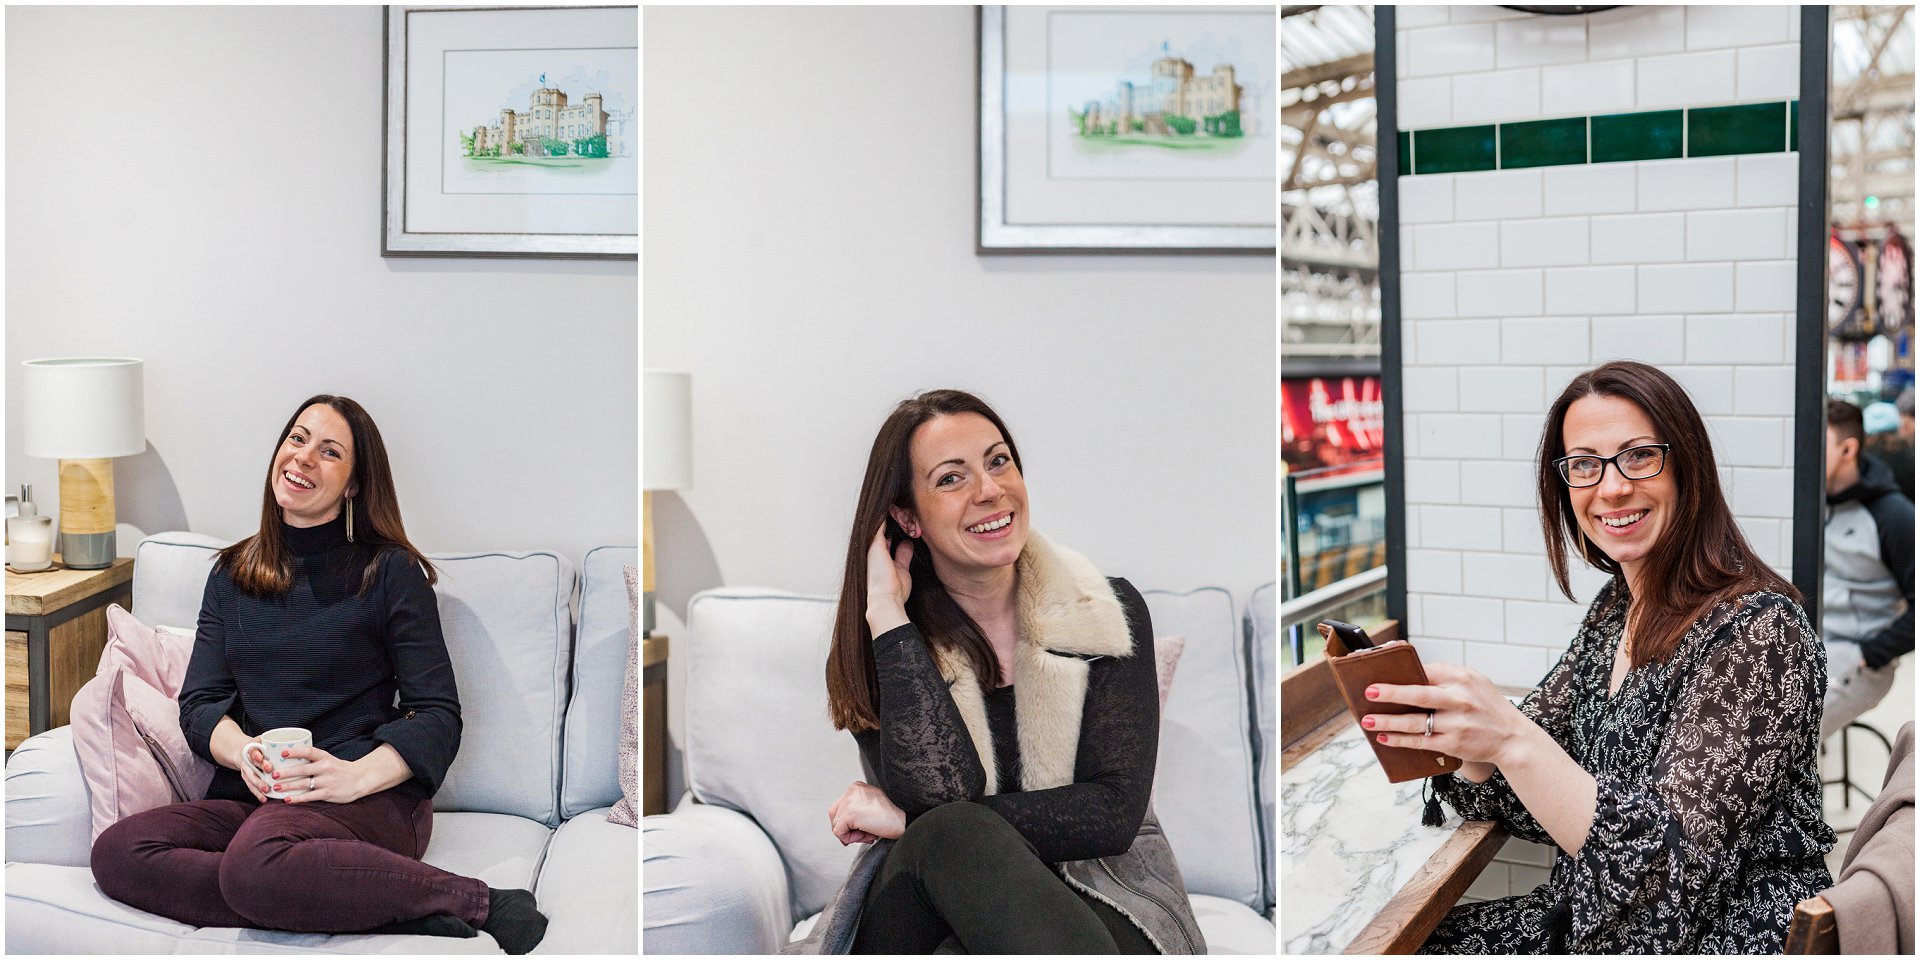 Personal branding portraits at home and commuting into London.  Images by AKP Branding Stories